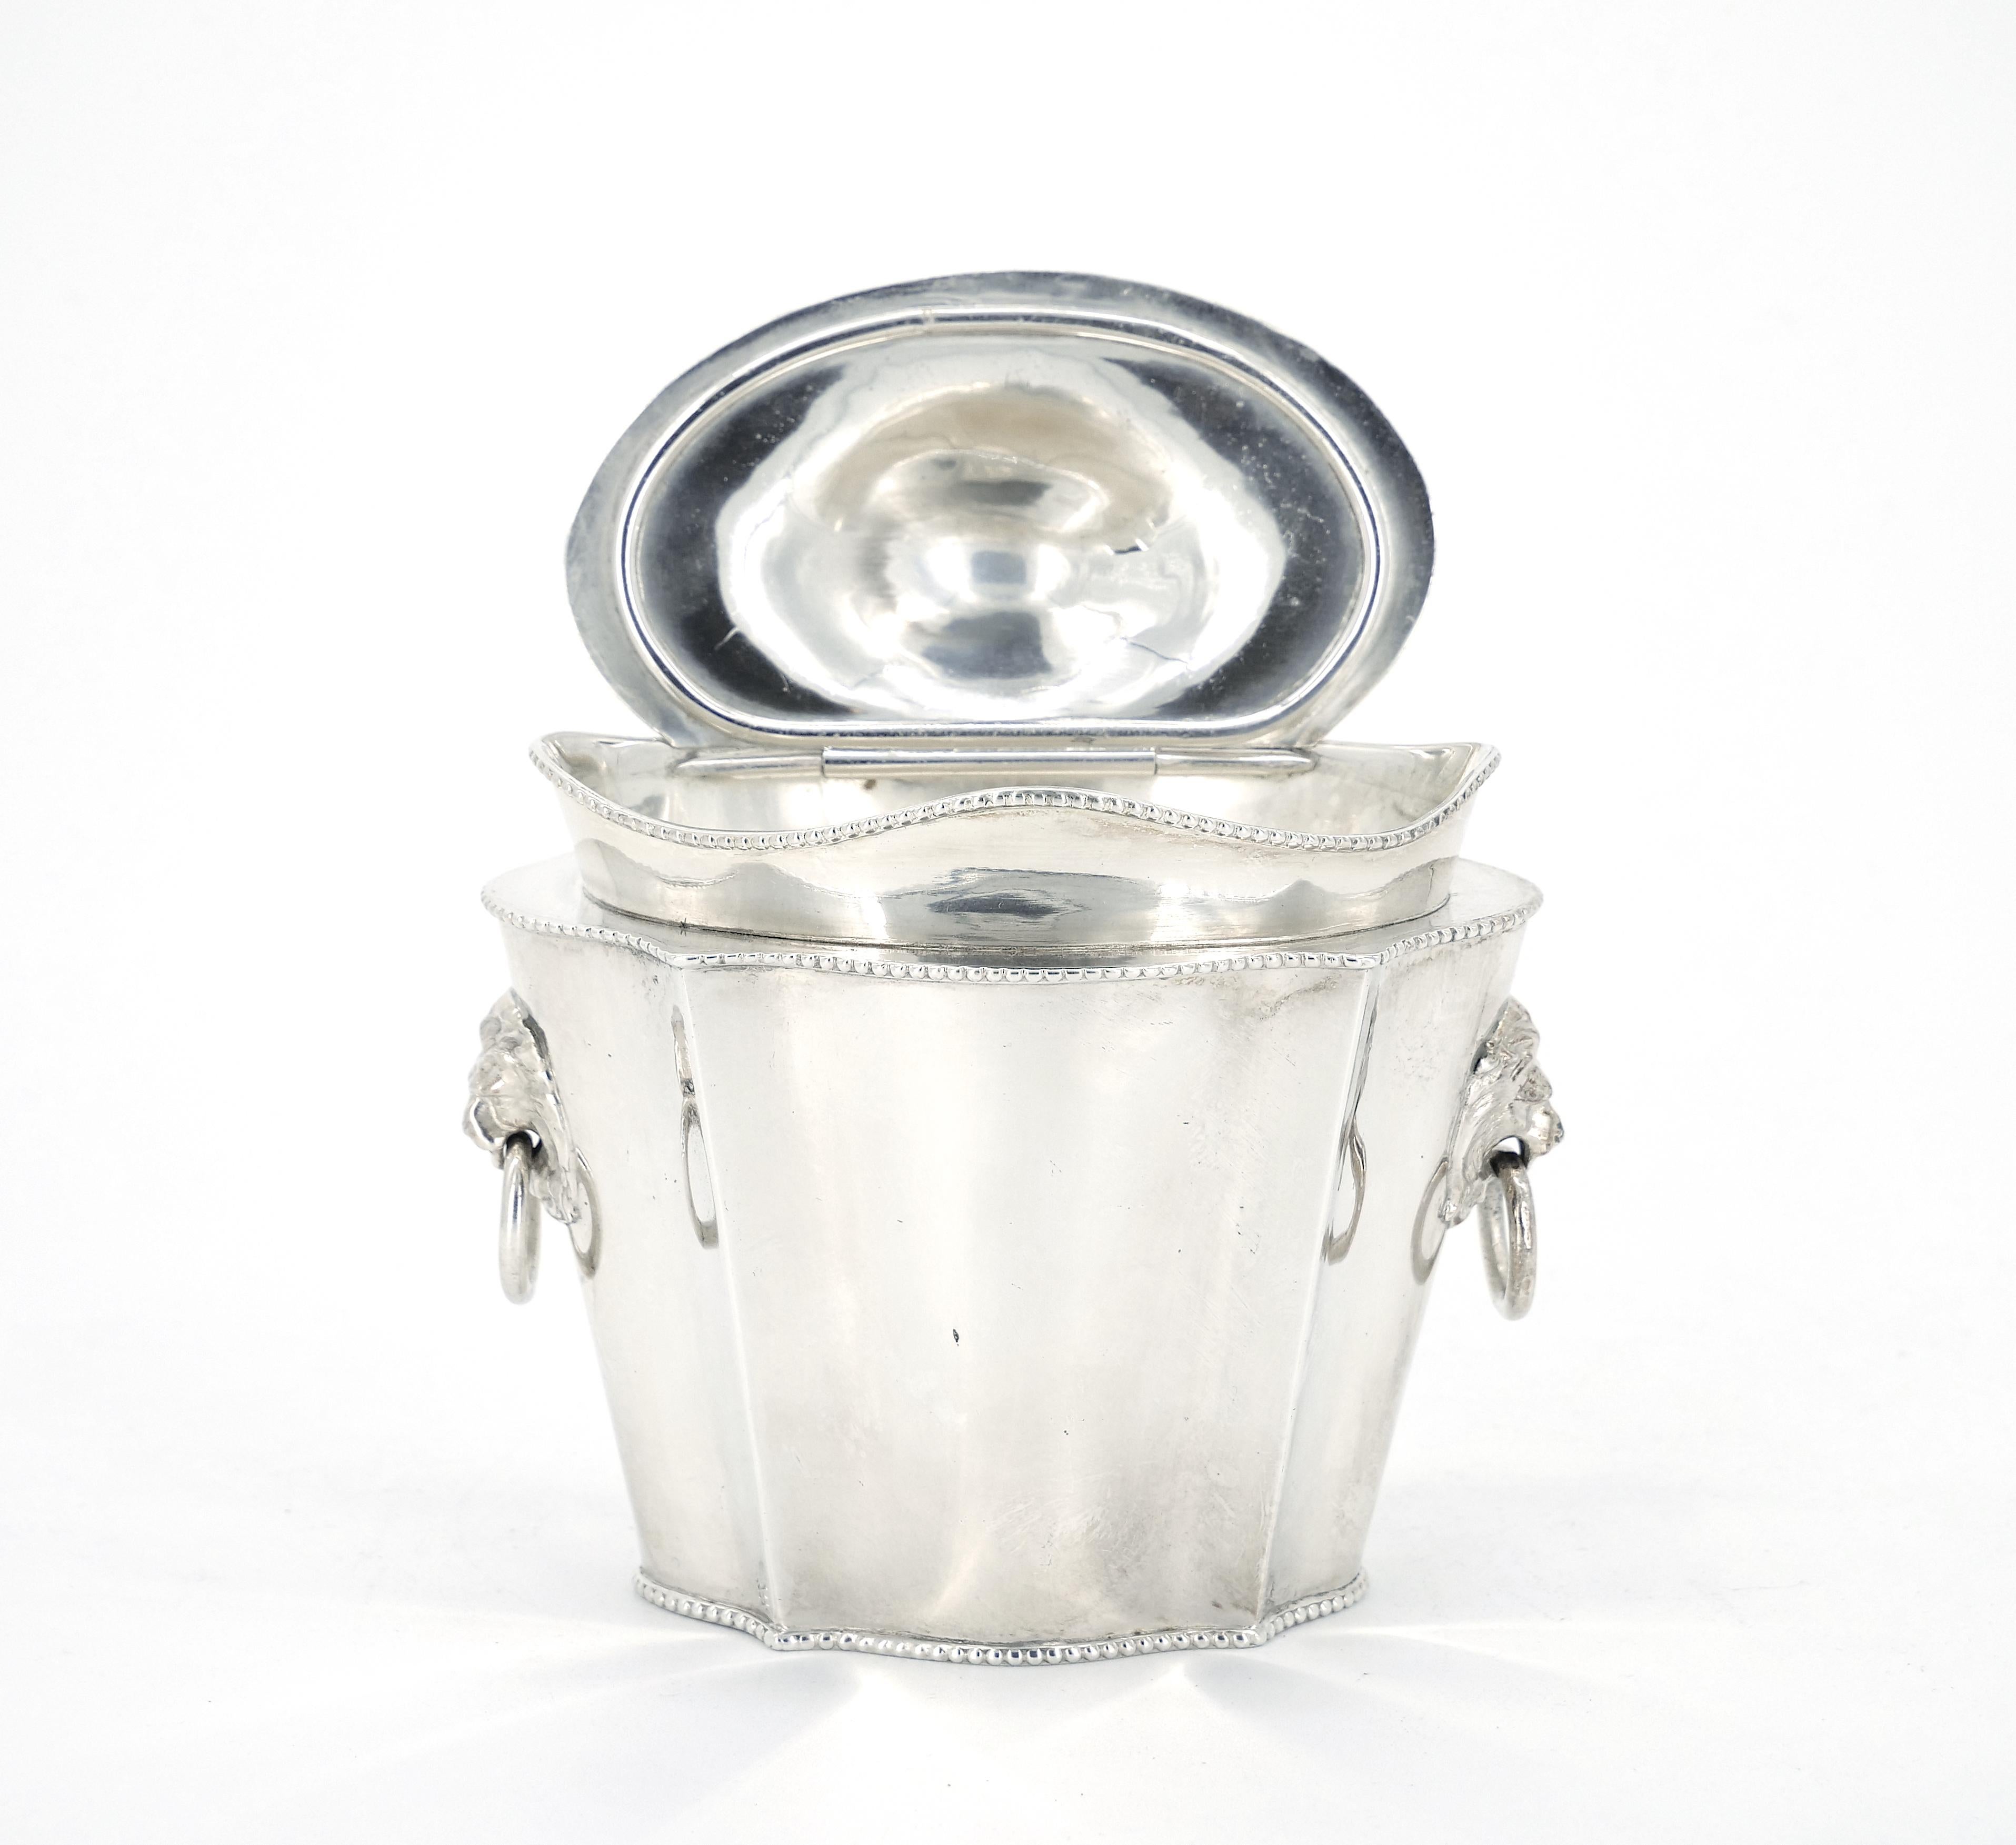 
Experience the timeless allure of our Old English Sheffield silver plate art deco style tea caddy, adorned with captivating lion head side handles and an attached cover. This extraordinary piece is a testament to the exquisite craftsmanship of a